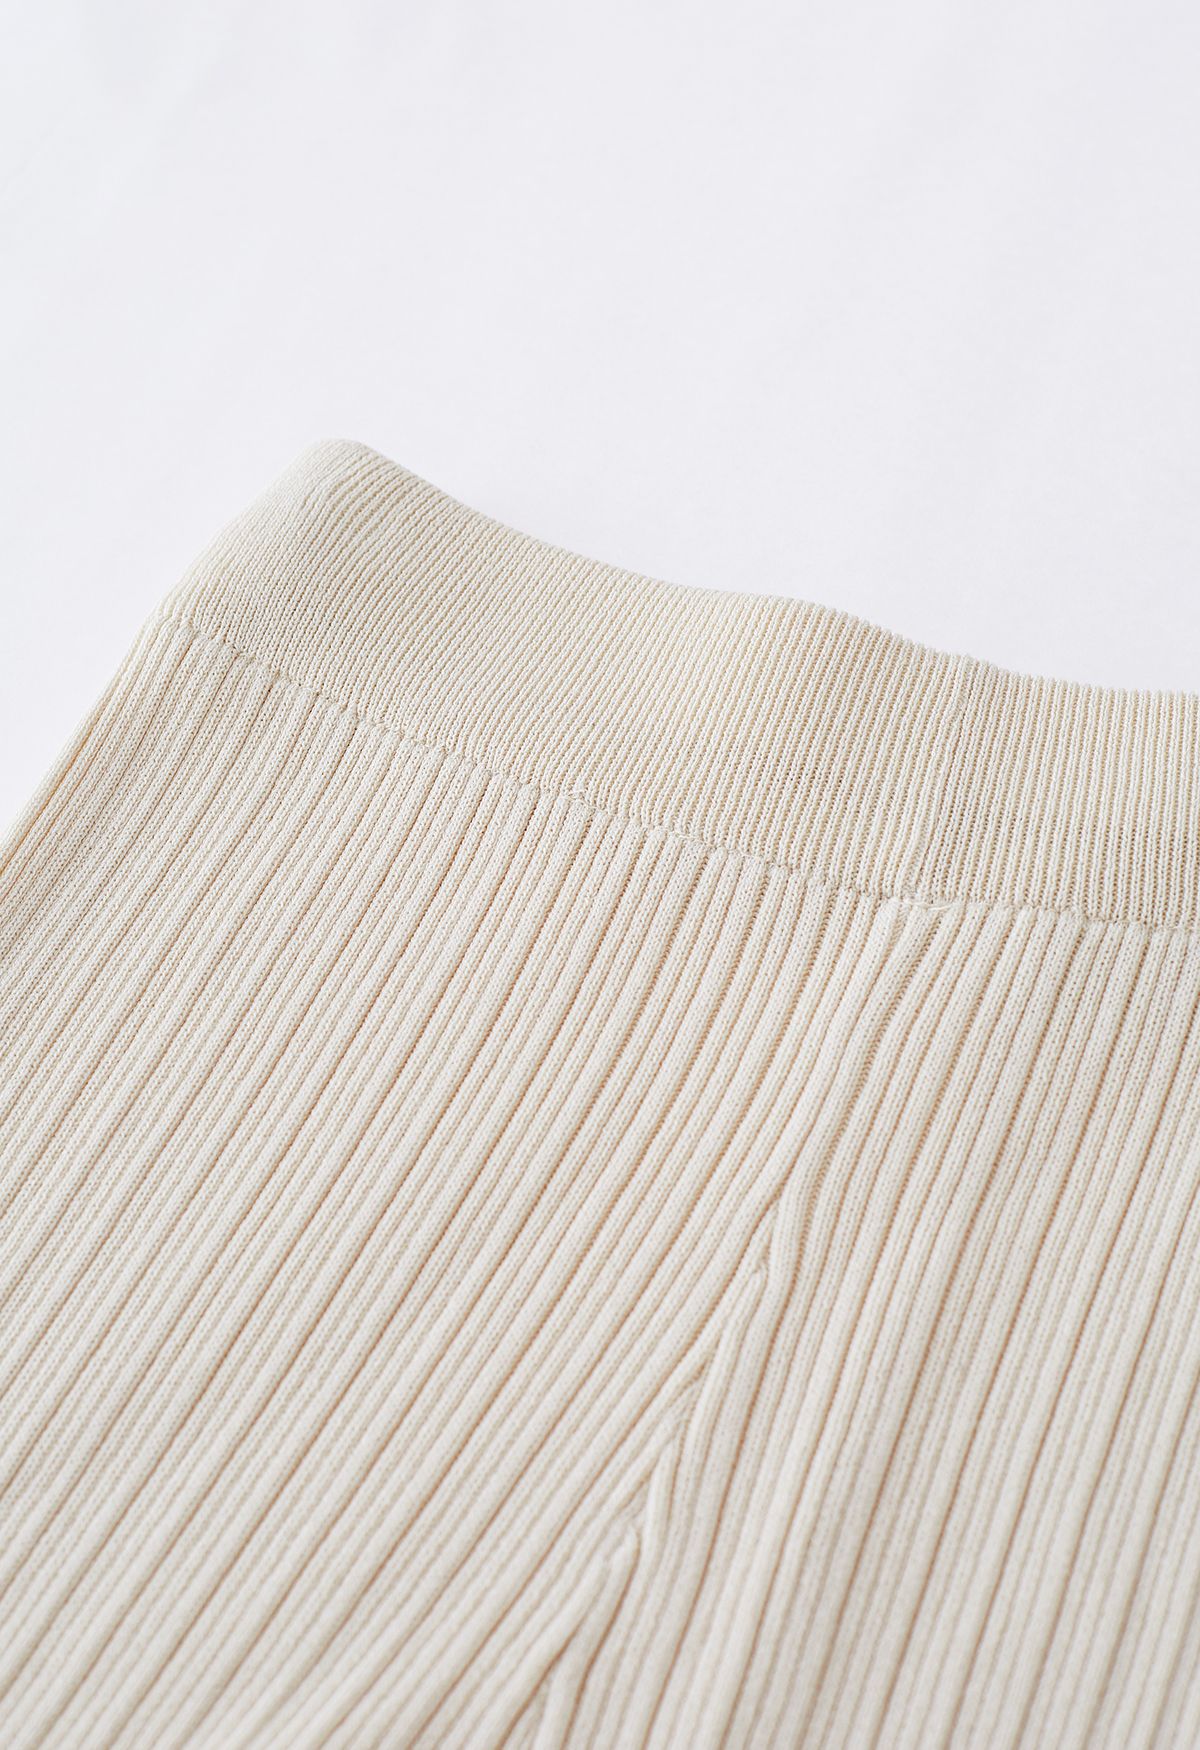 Drawstring Sleeve Knit Top and Pants Set in Cream